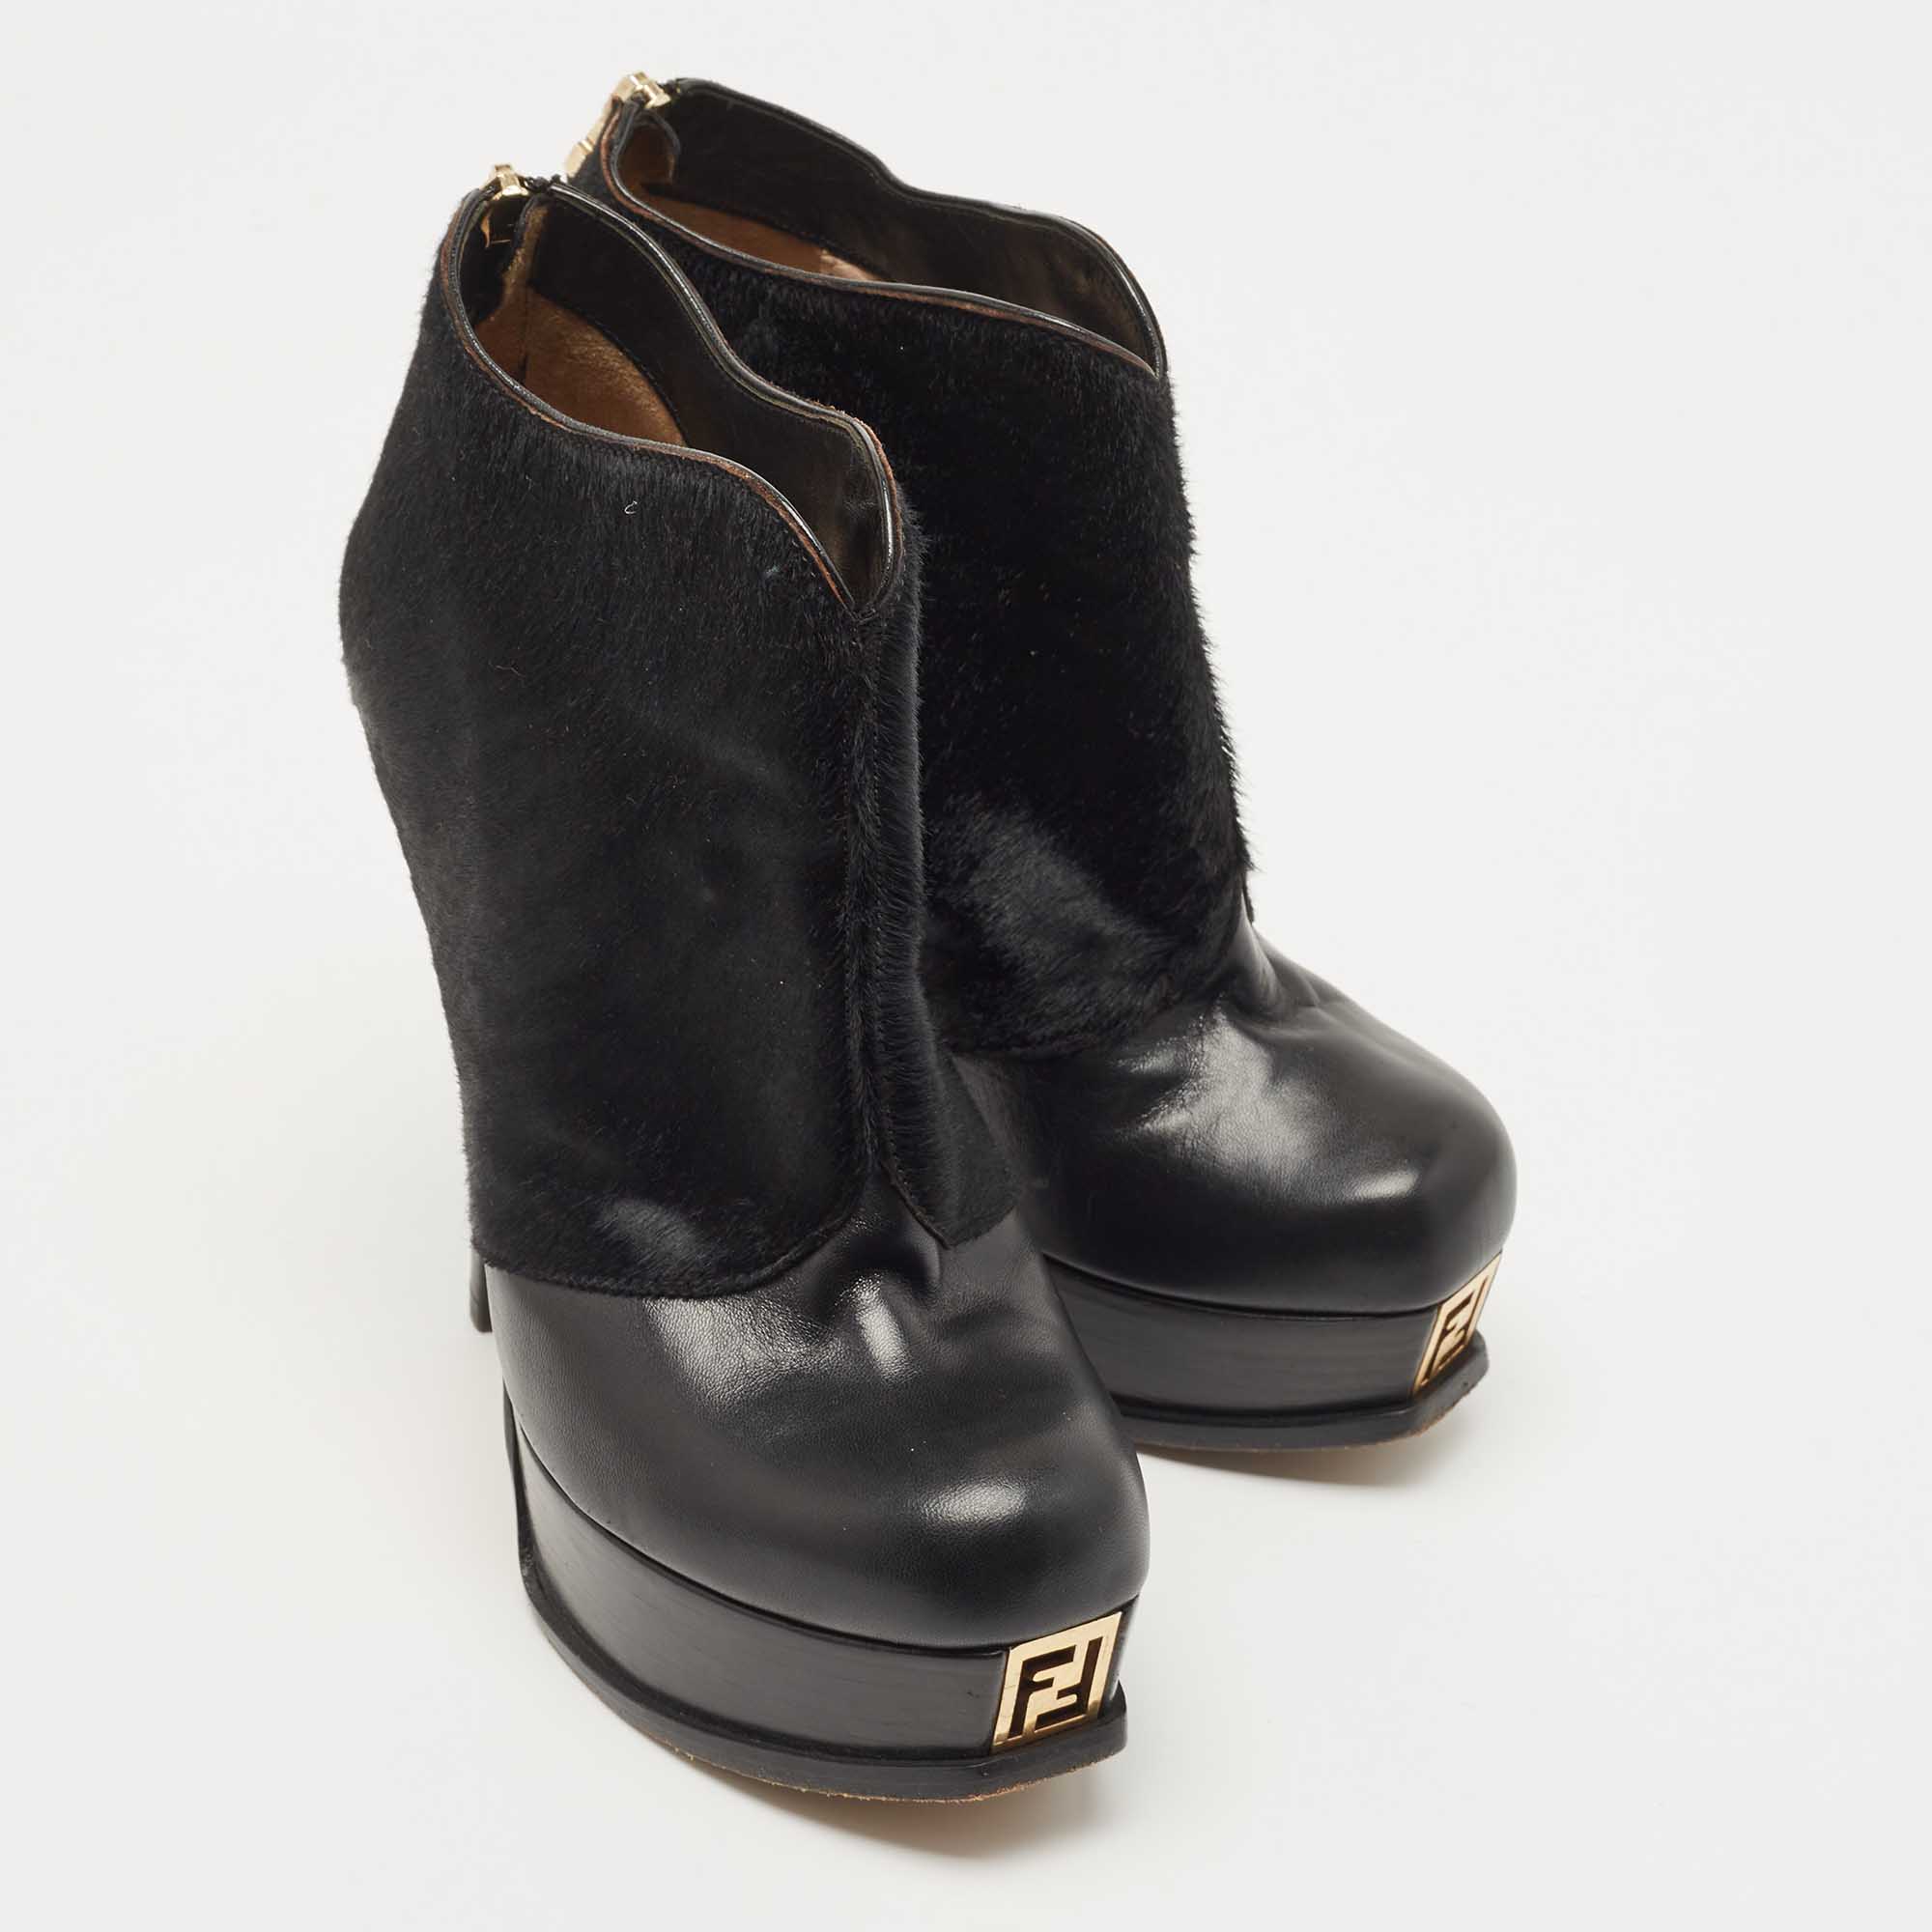 Fendi Black Leather And Suede Fendista Ankle Boots Size 36.5